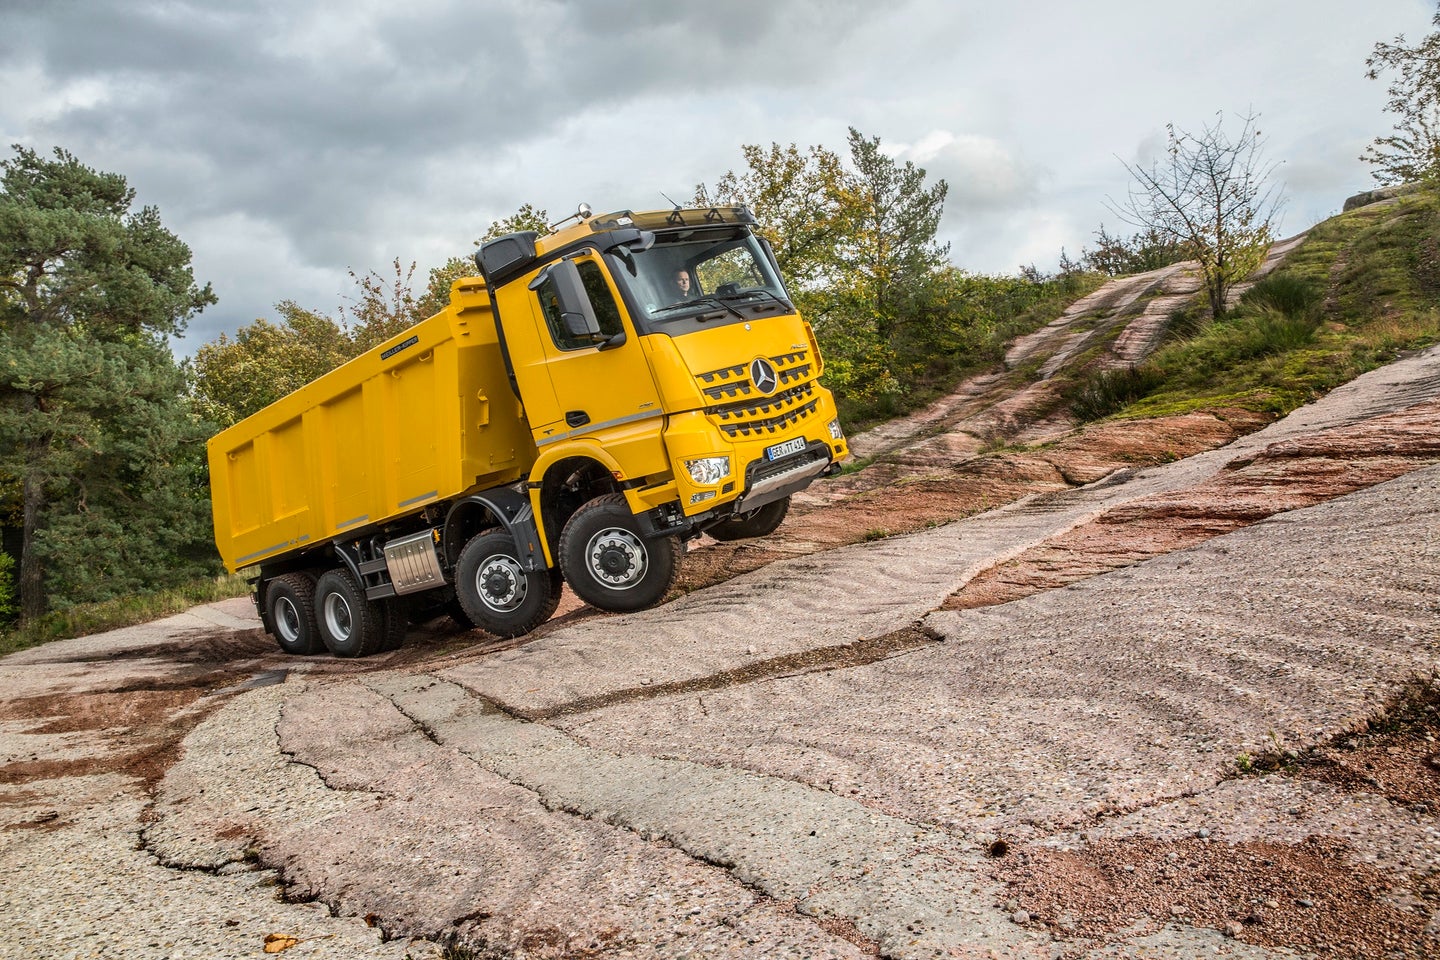 Mercedes Arocs Is a Custom Monster Truck for Construction Sites